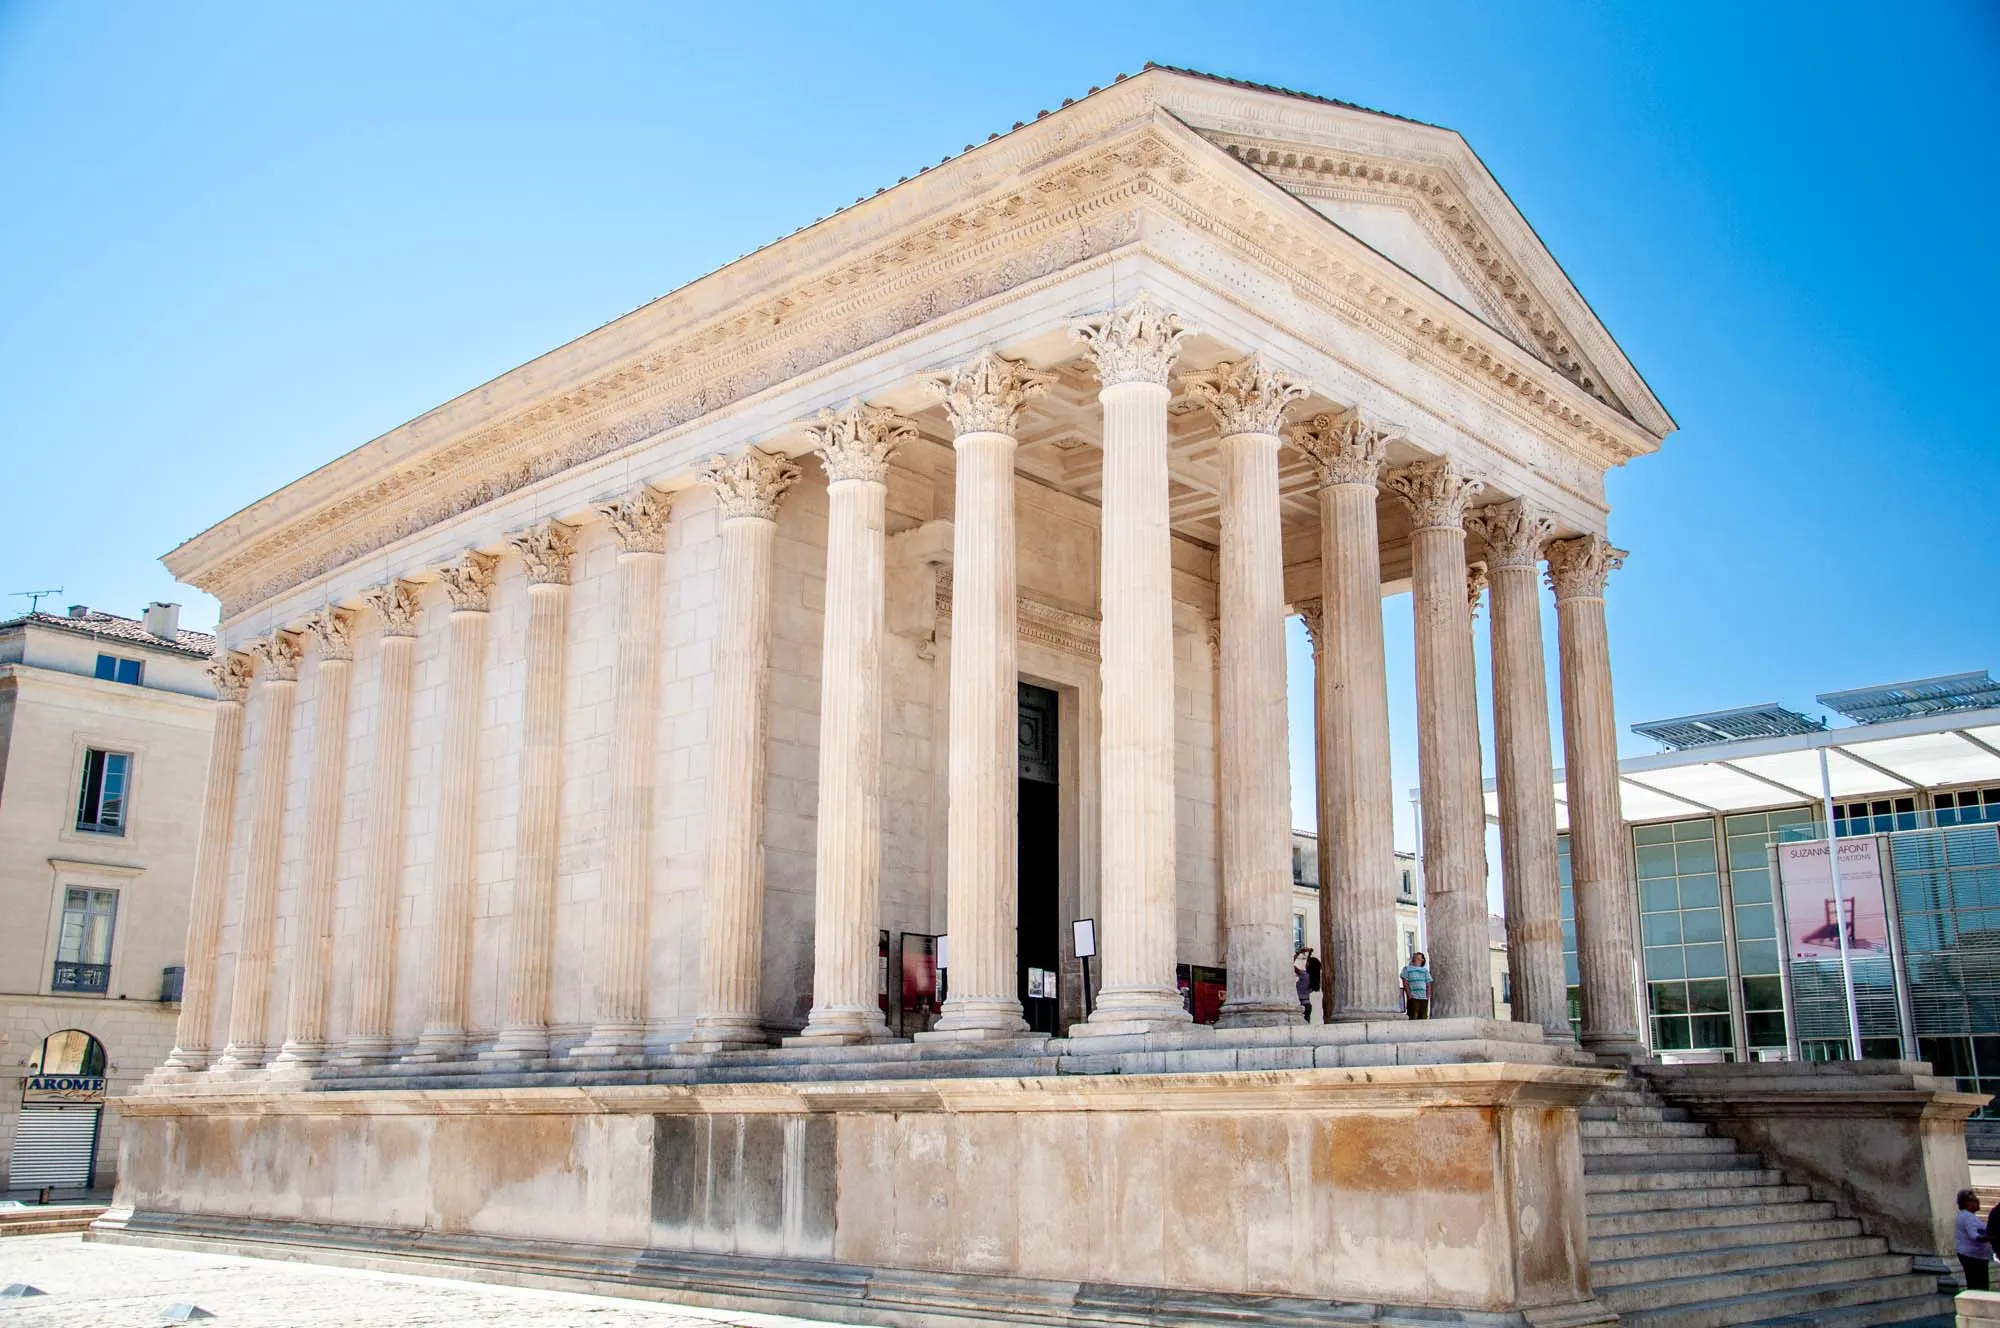 Roman temple with numerous marble columns 